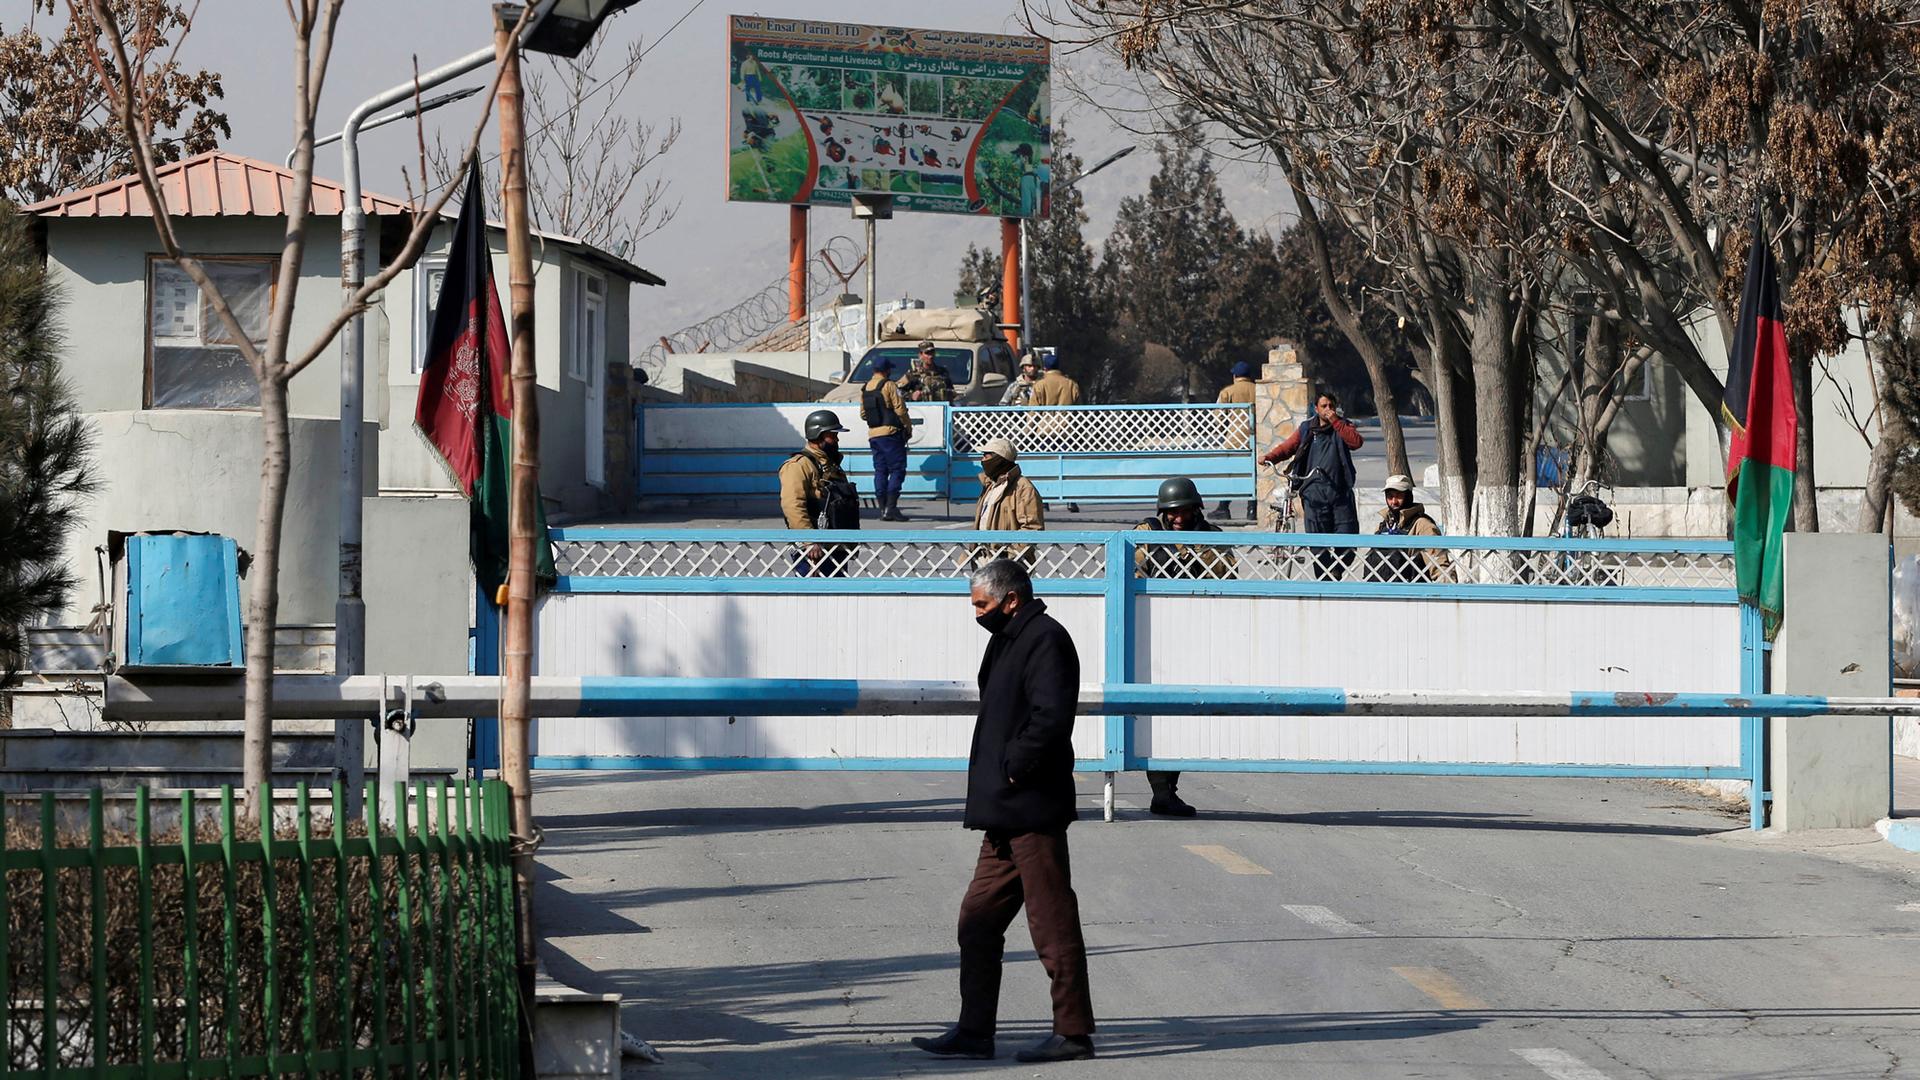 Afghan security forces stand guard at the entrance gate of the Intercontinental Hotel a day after an attack in Kabul, Afghanistan, Jan. 22, 2018.